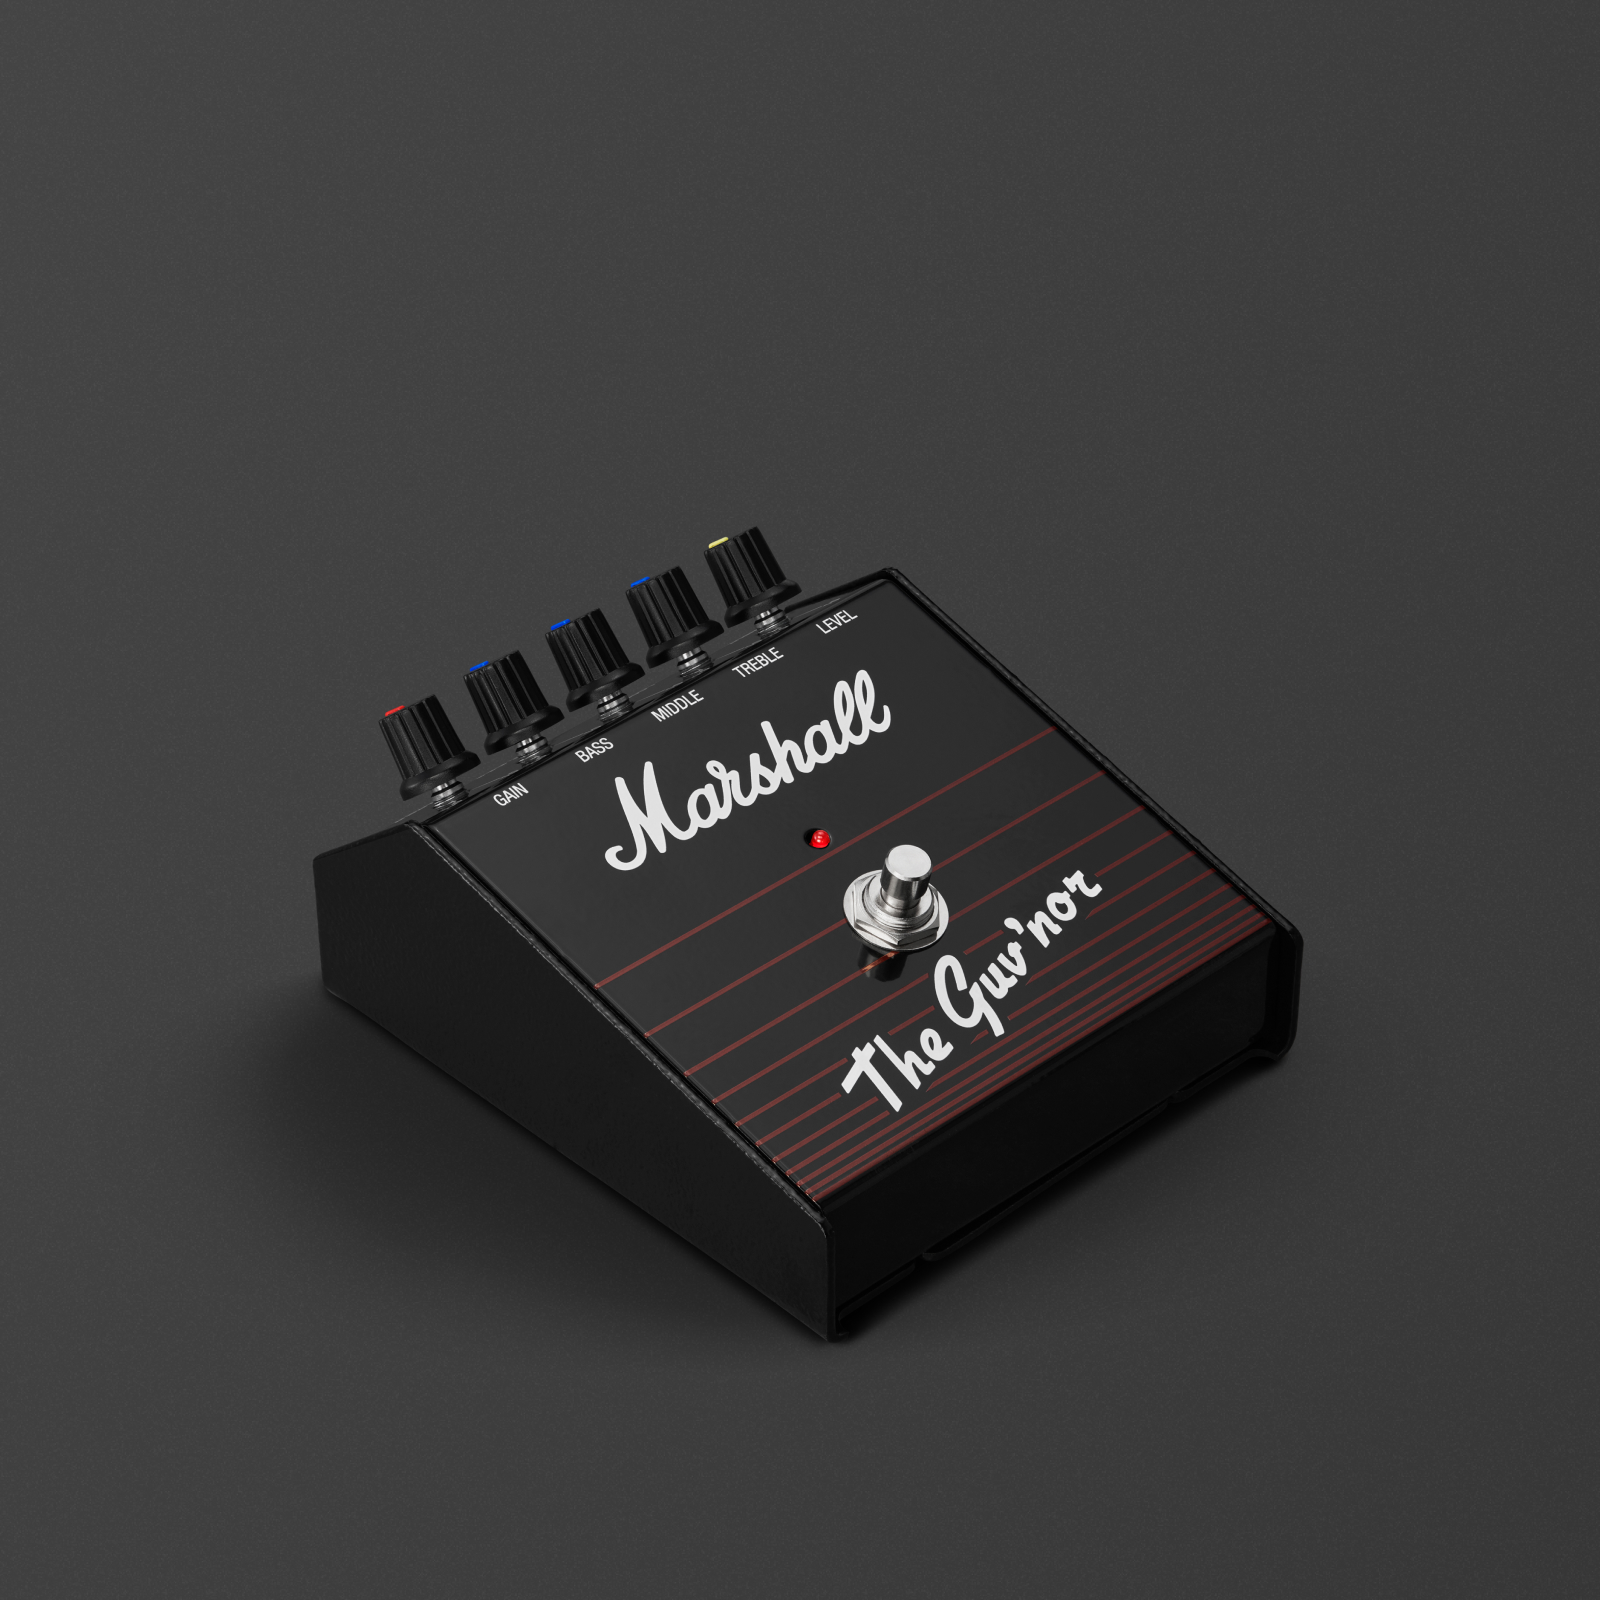 Black The Guv'nor effects pedal for recreating the iconic sound of the original.